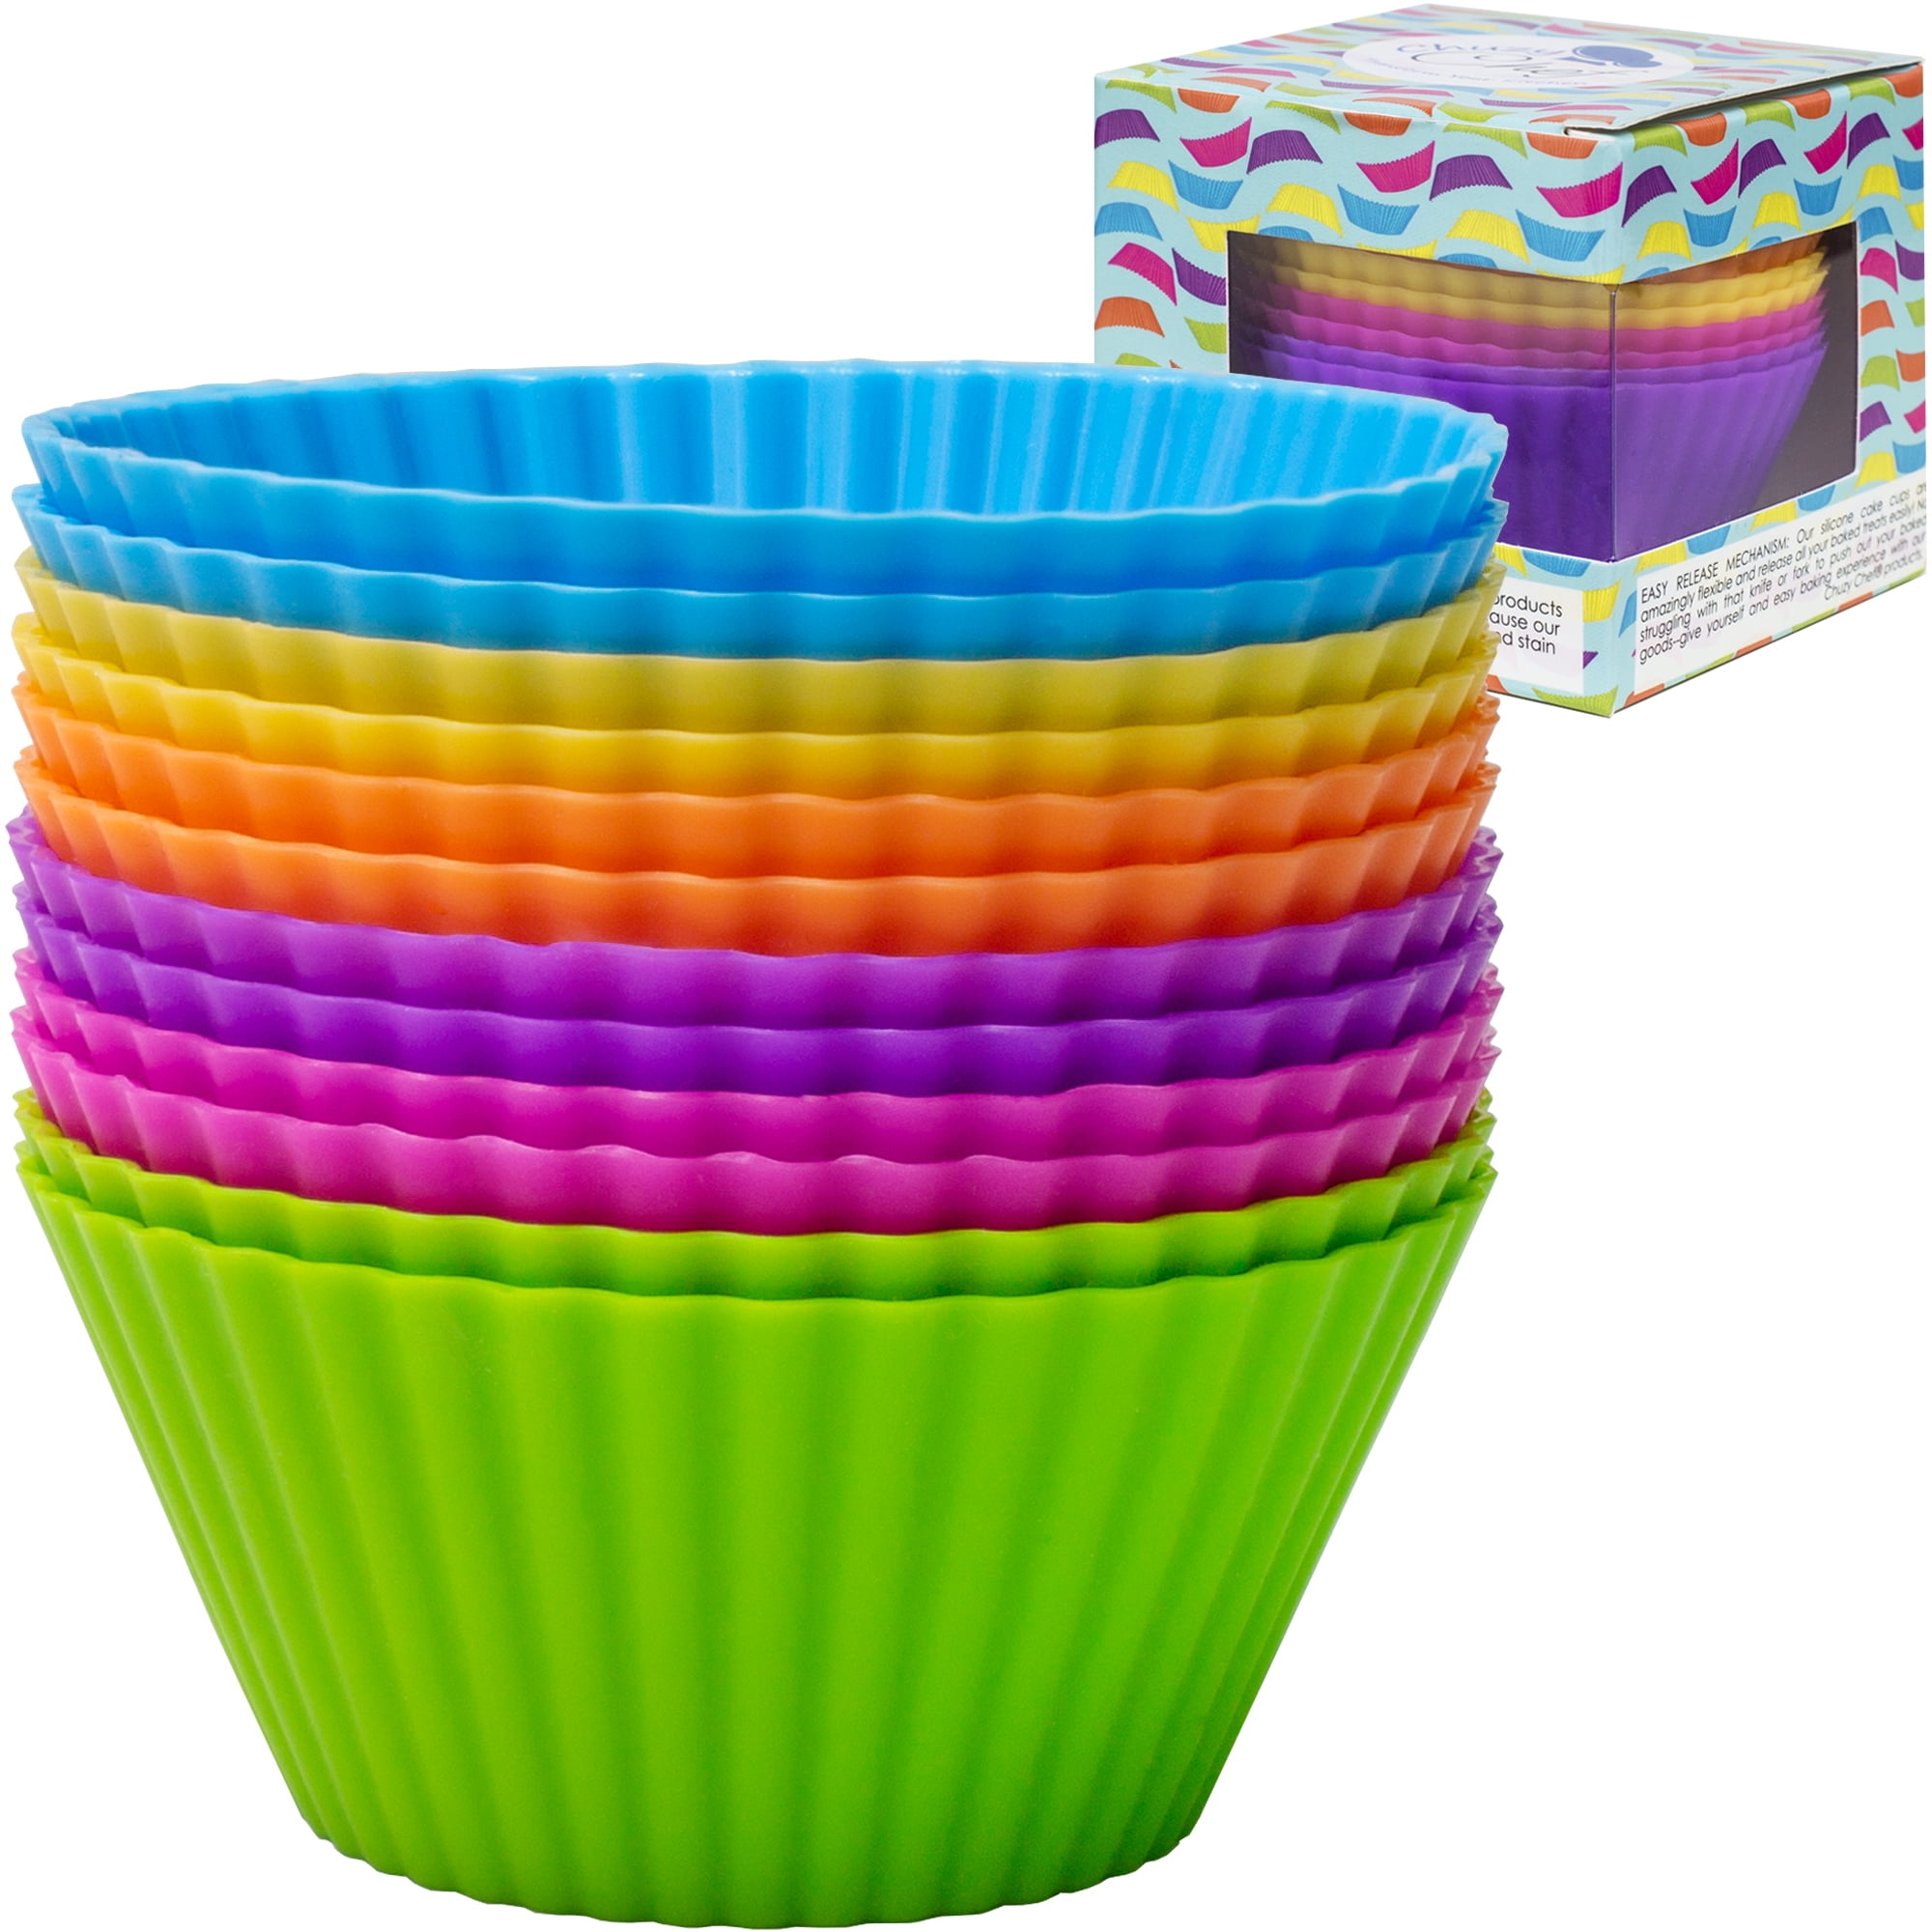 Silicone Cupcake Baking Cups Molds 12 Pieces Assorted Colors